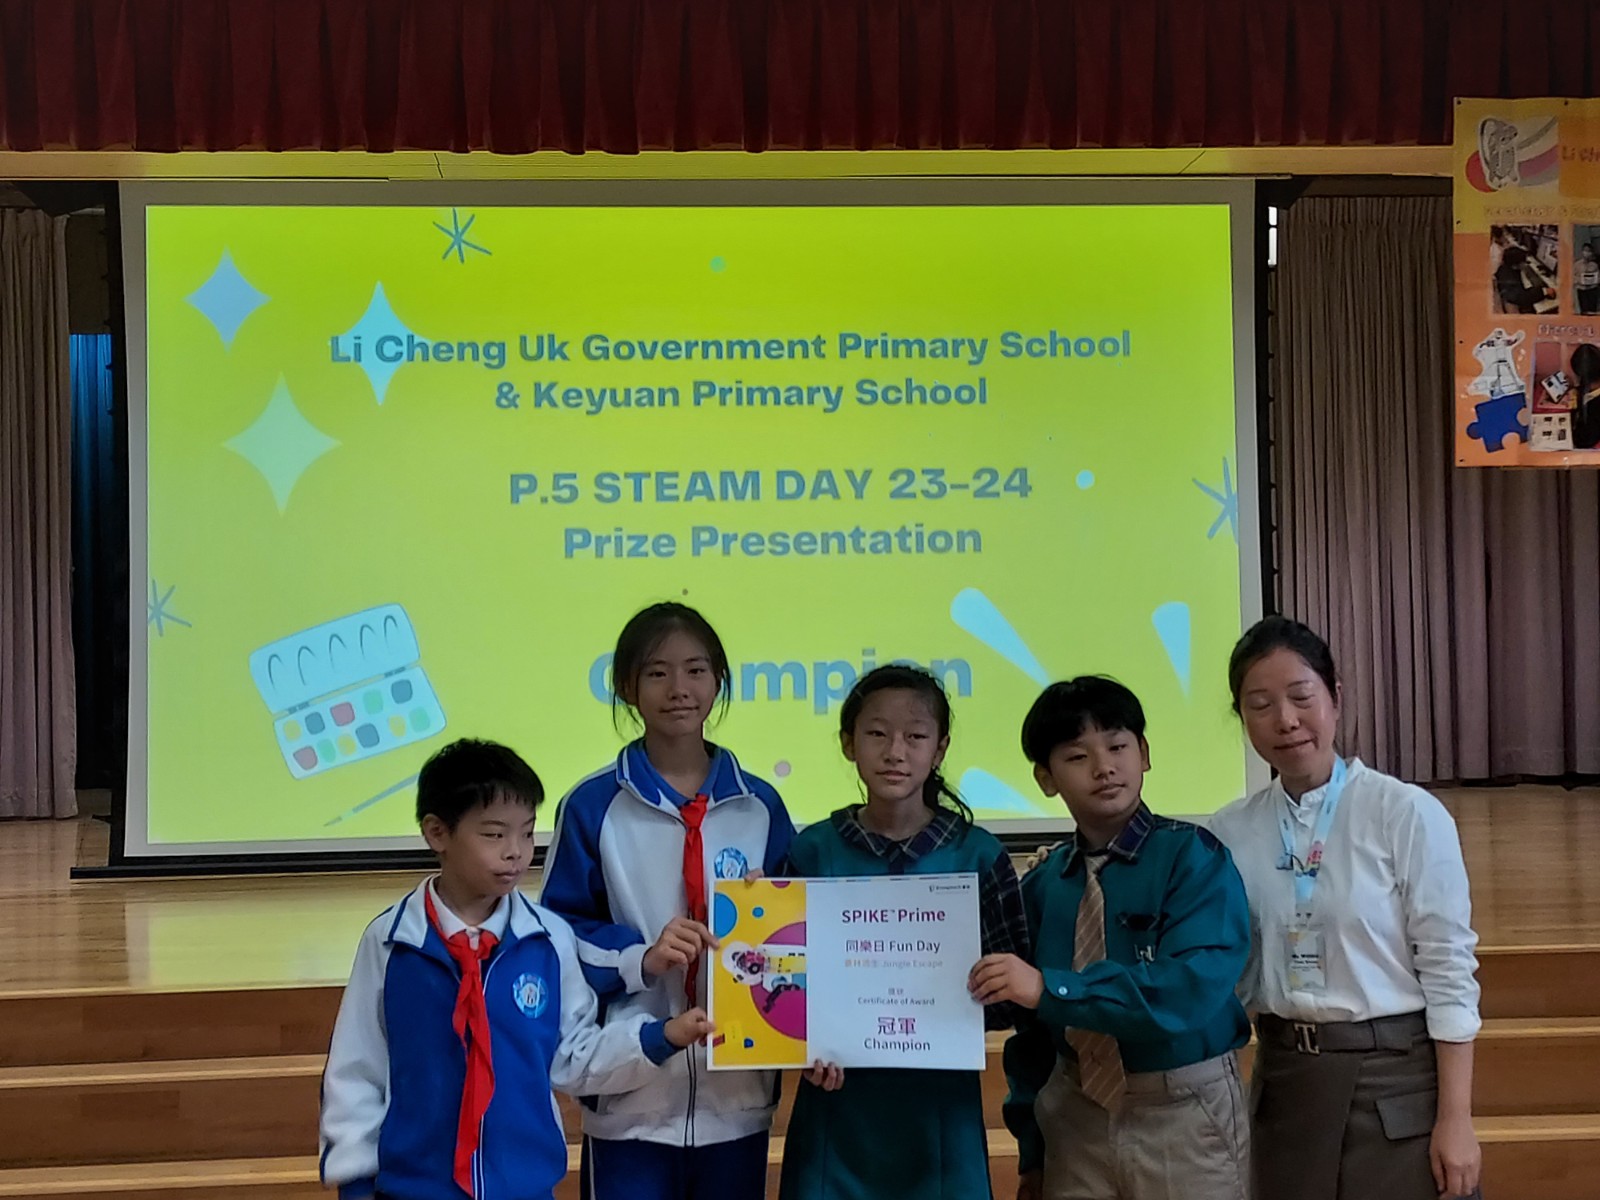 SPIKE Prime Fun Day - Li Cheng Uk Government Primary School